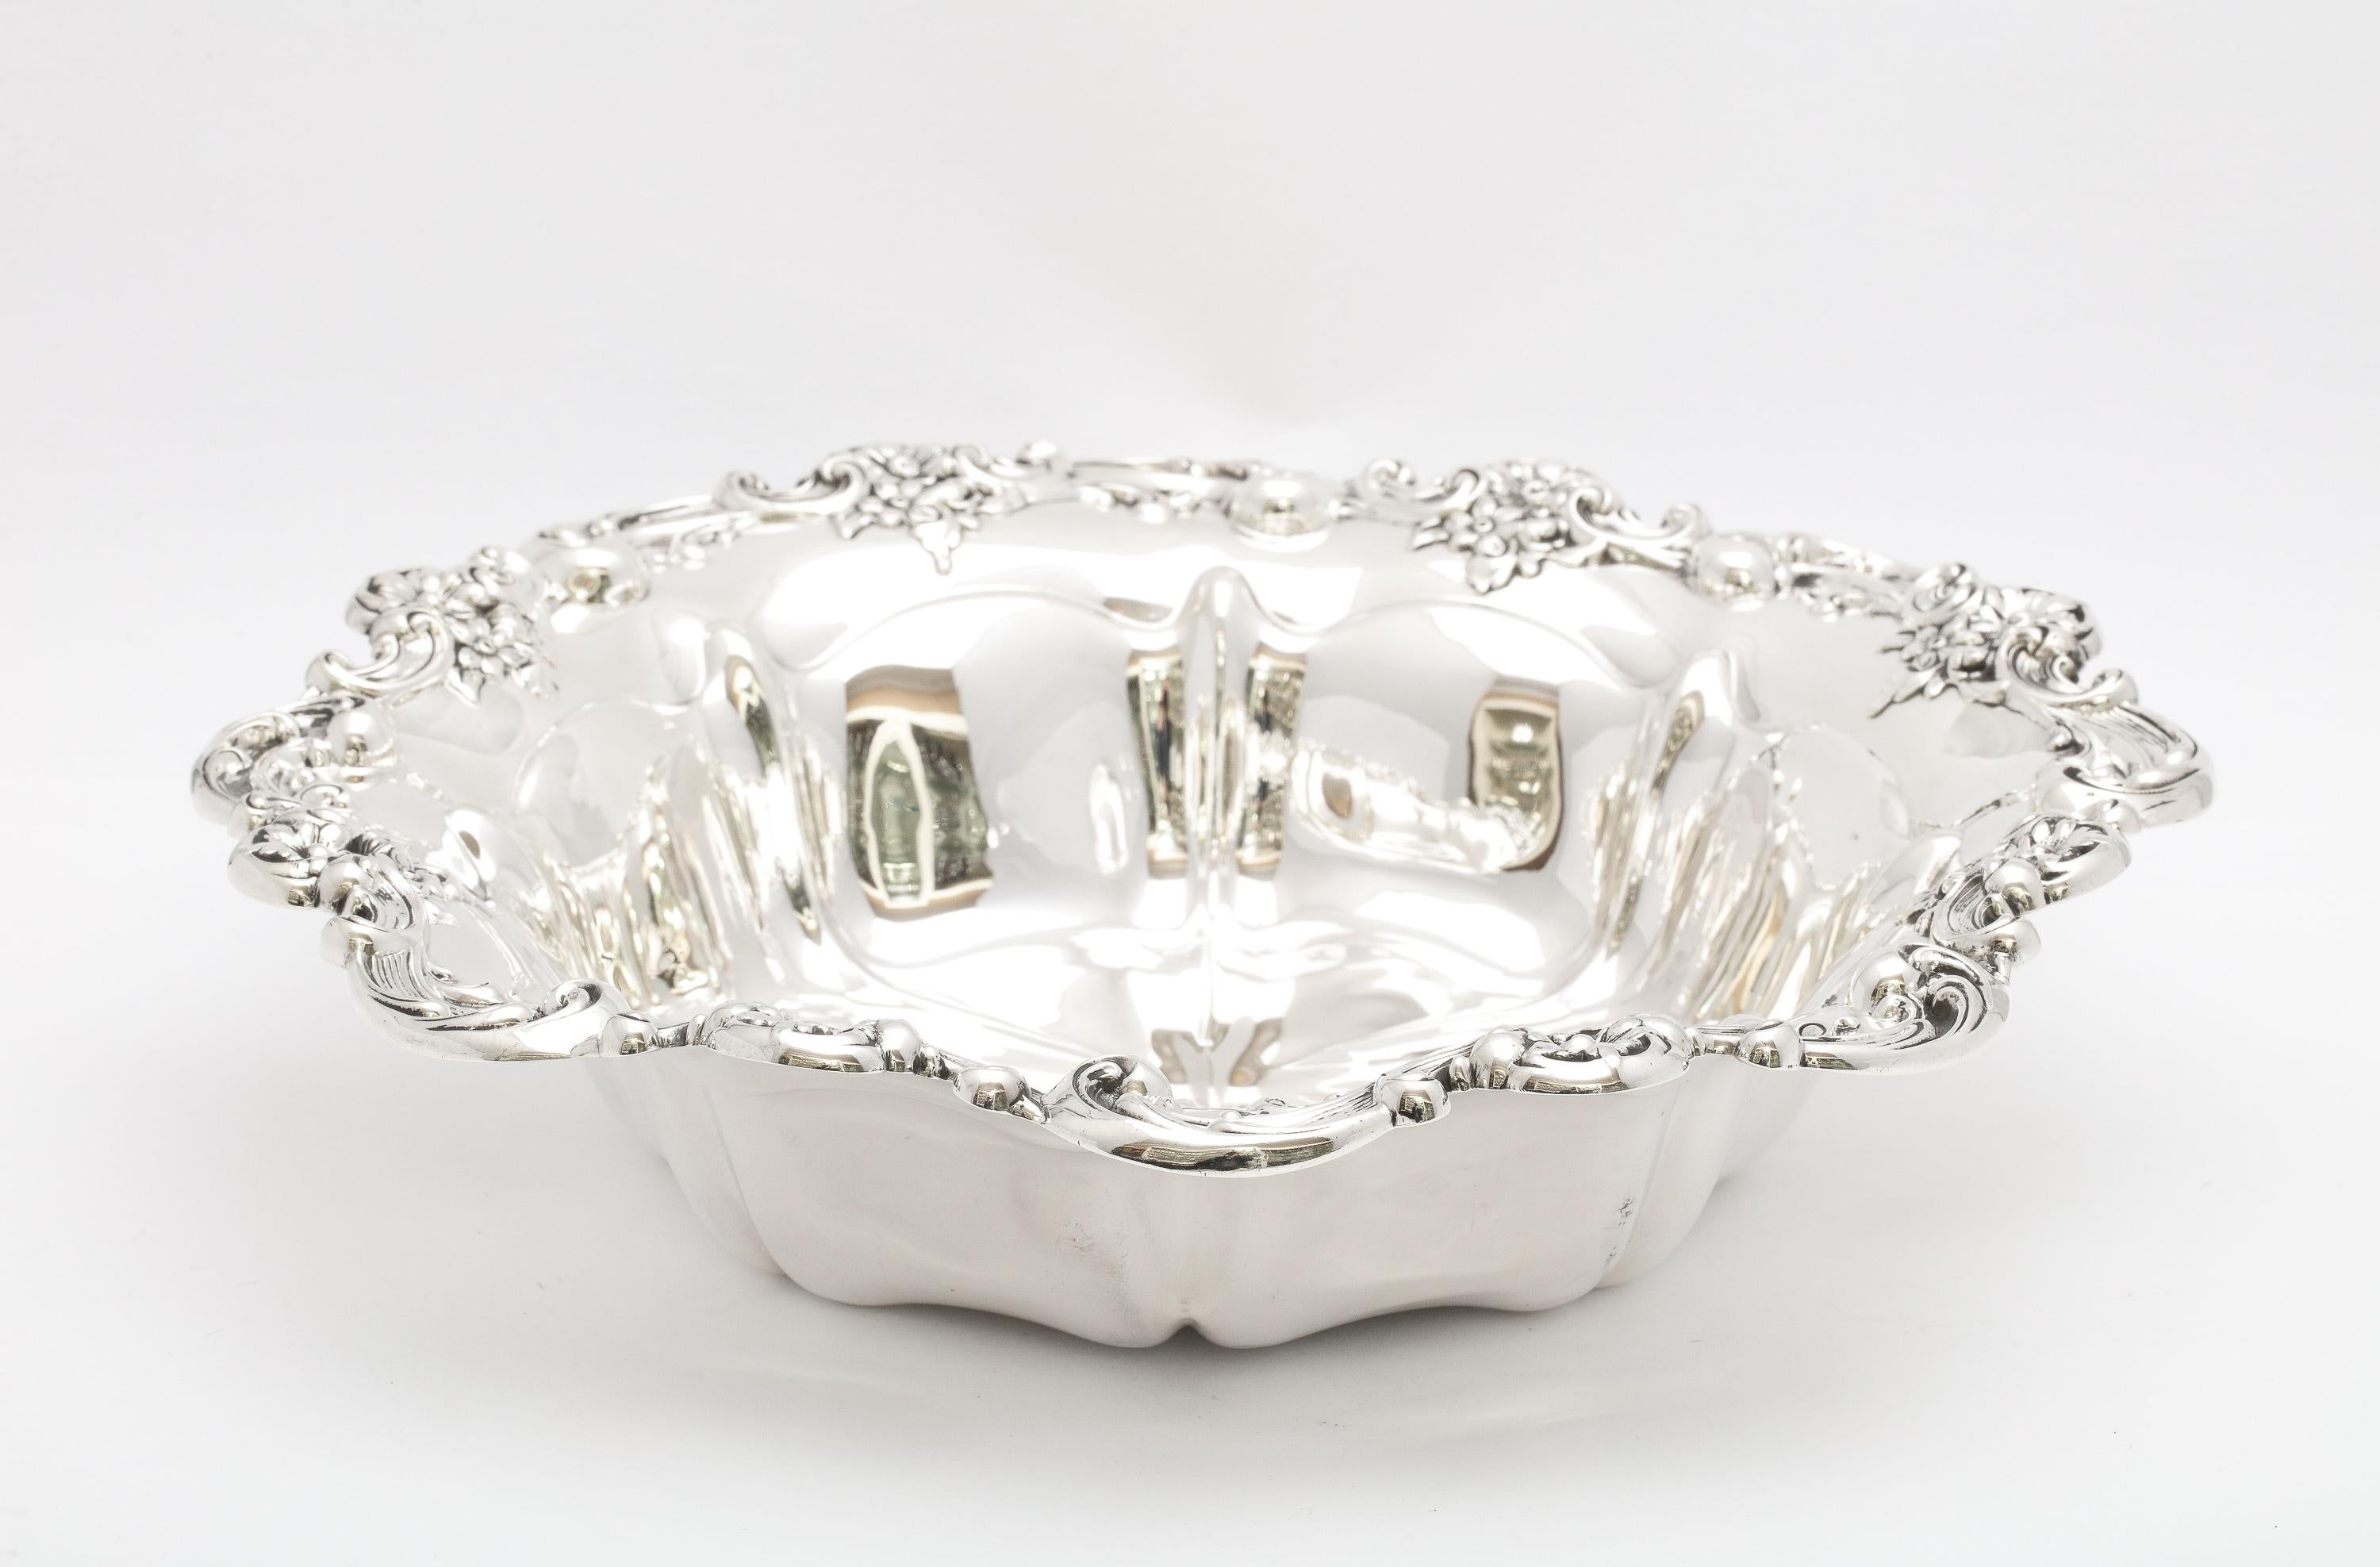 Beautiful Victorian-Style Sterling Silver Centerpiece Bowl By Gorham For Sale 1